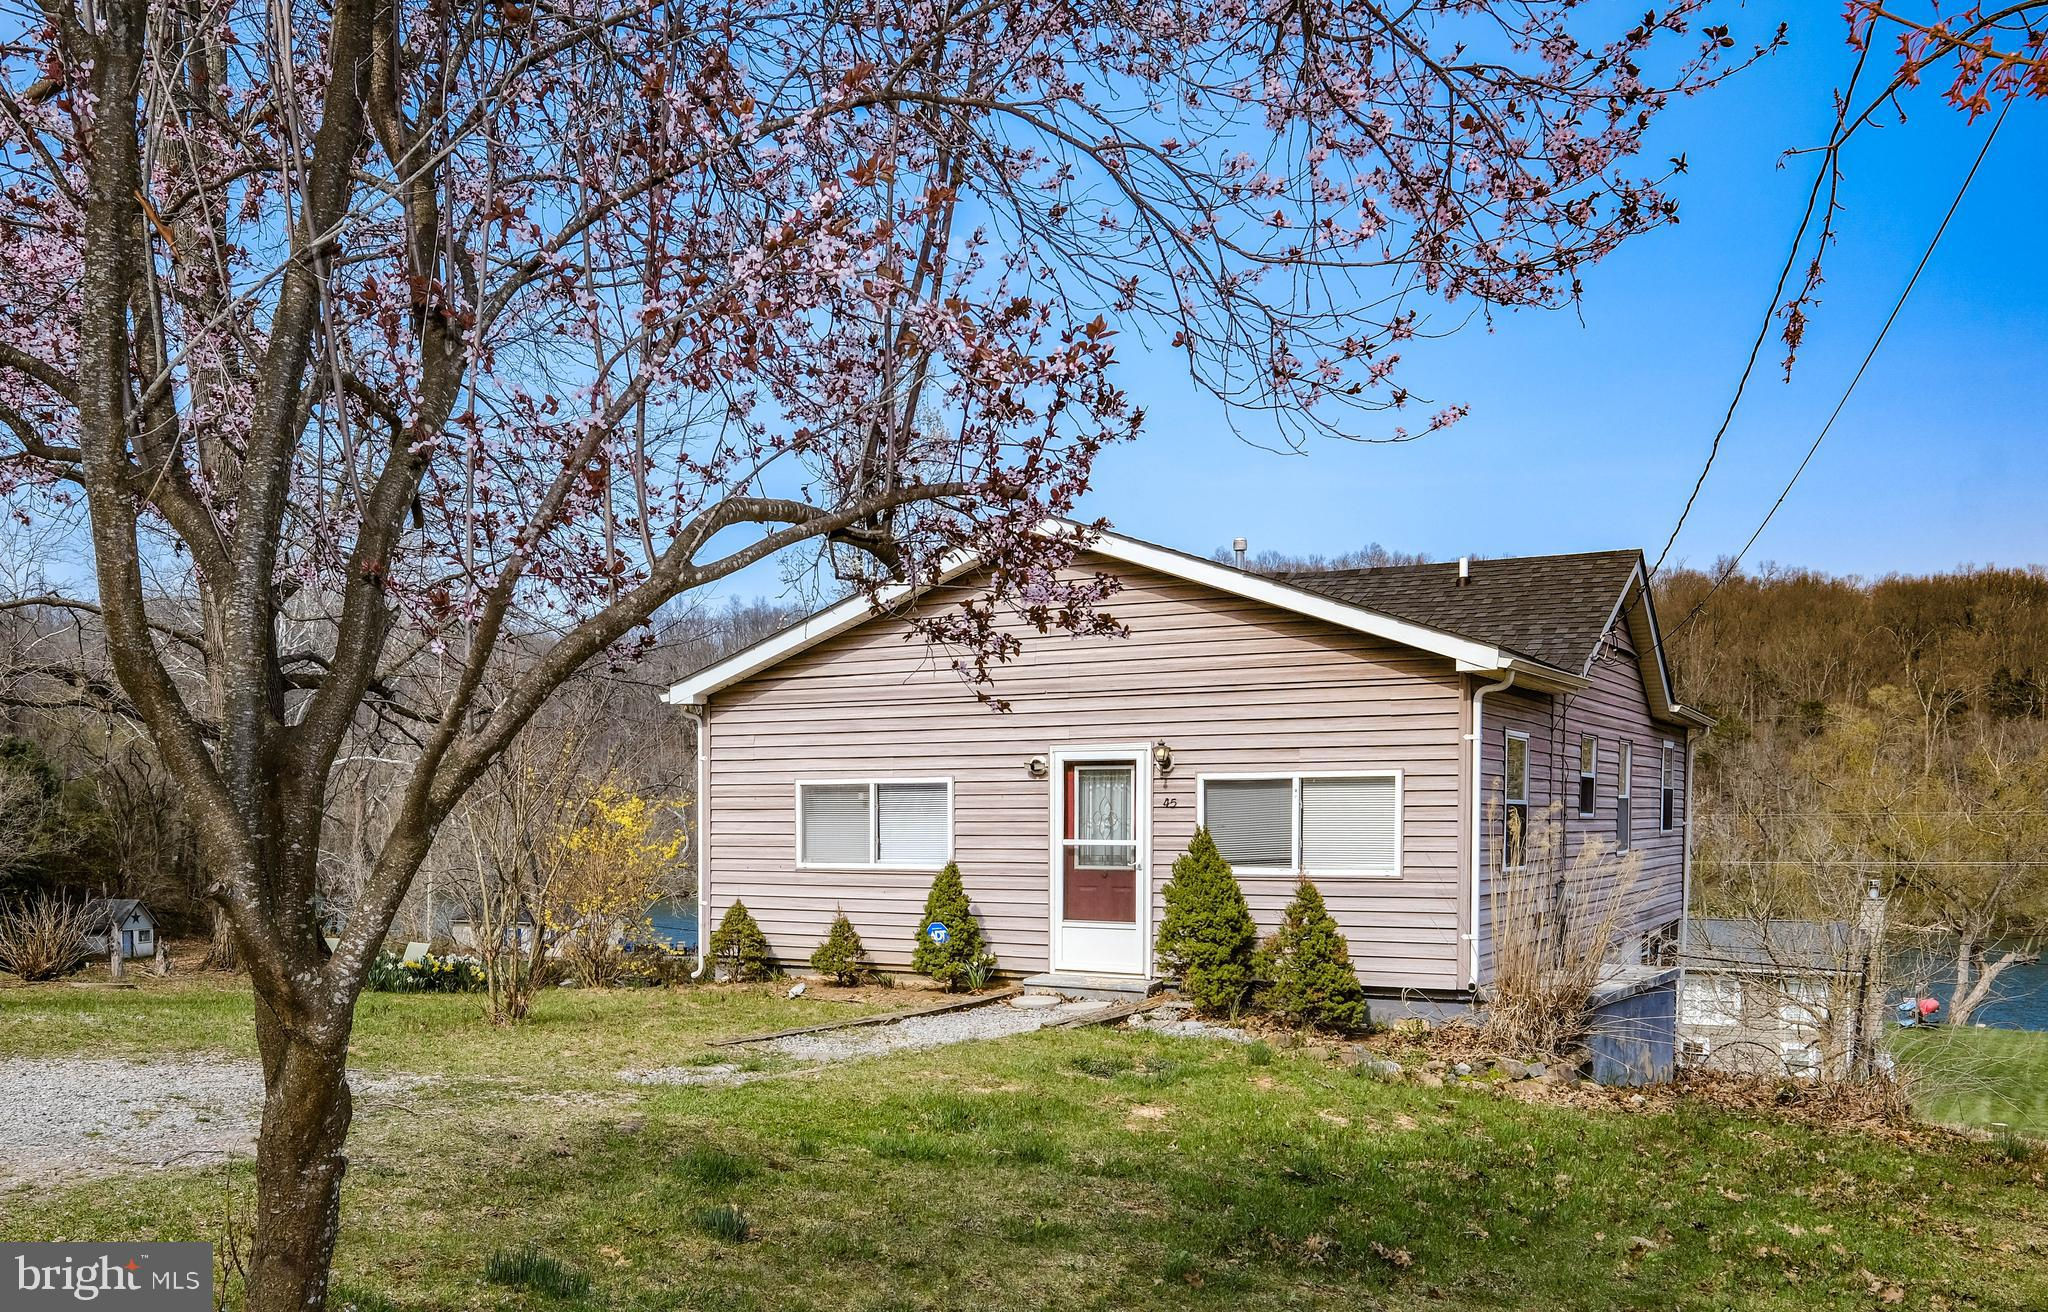 45 Harris Drive, Front Royal, VA 22630 is now new to the market!